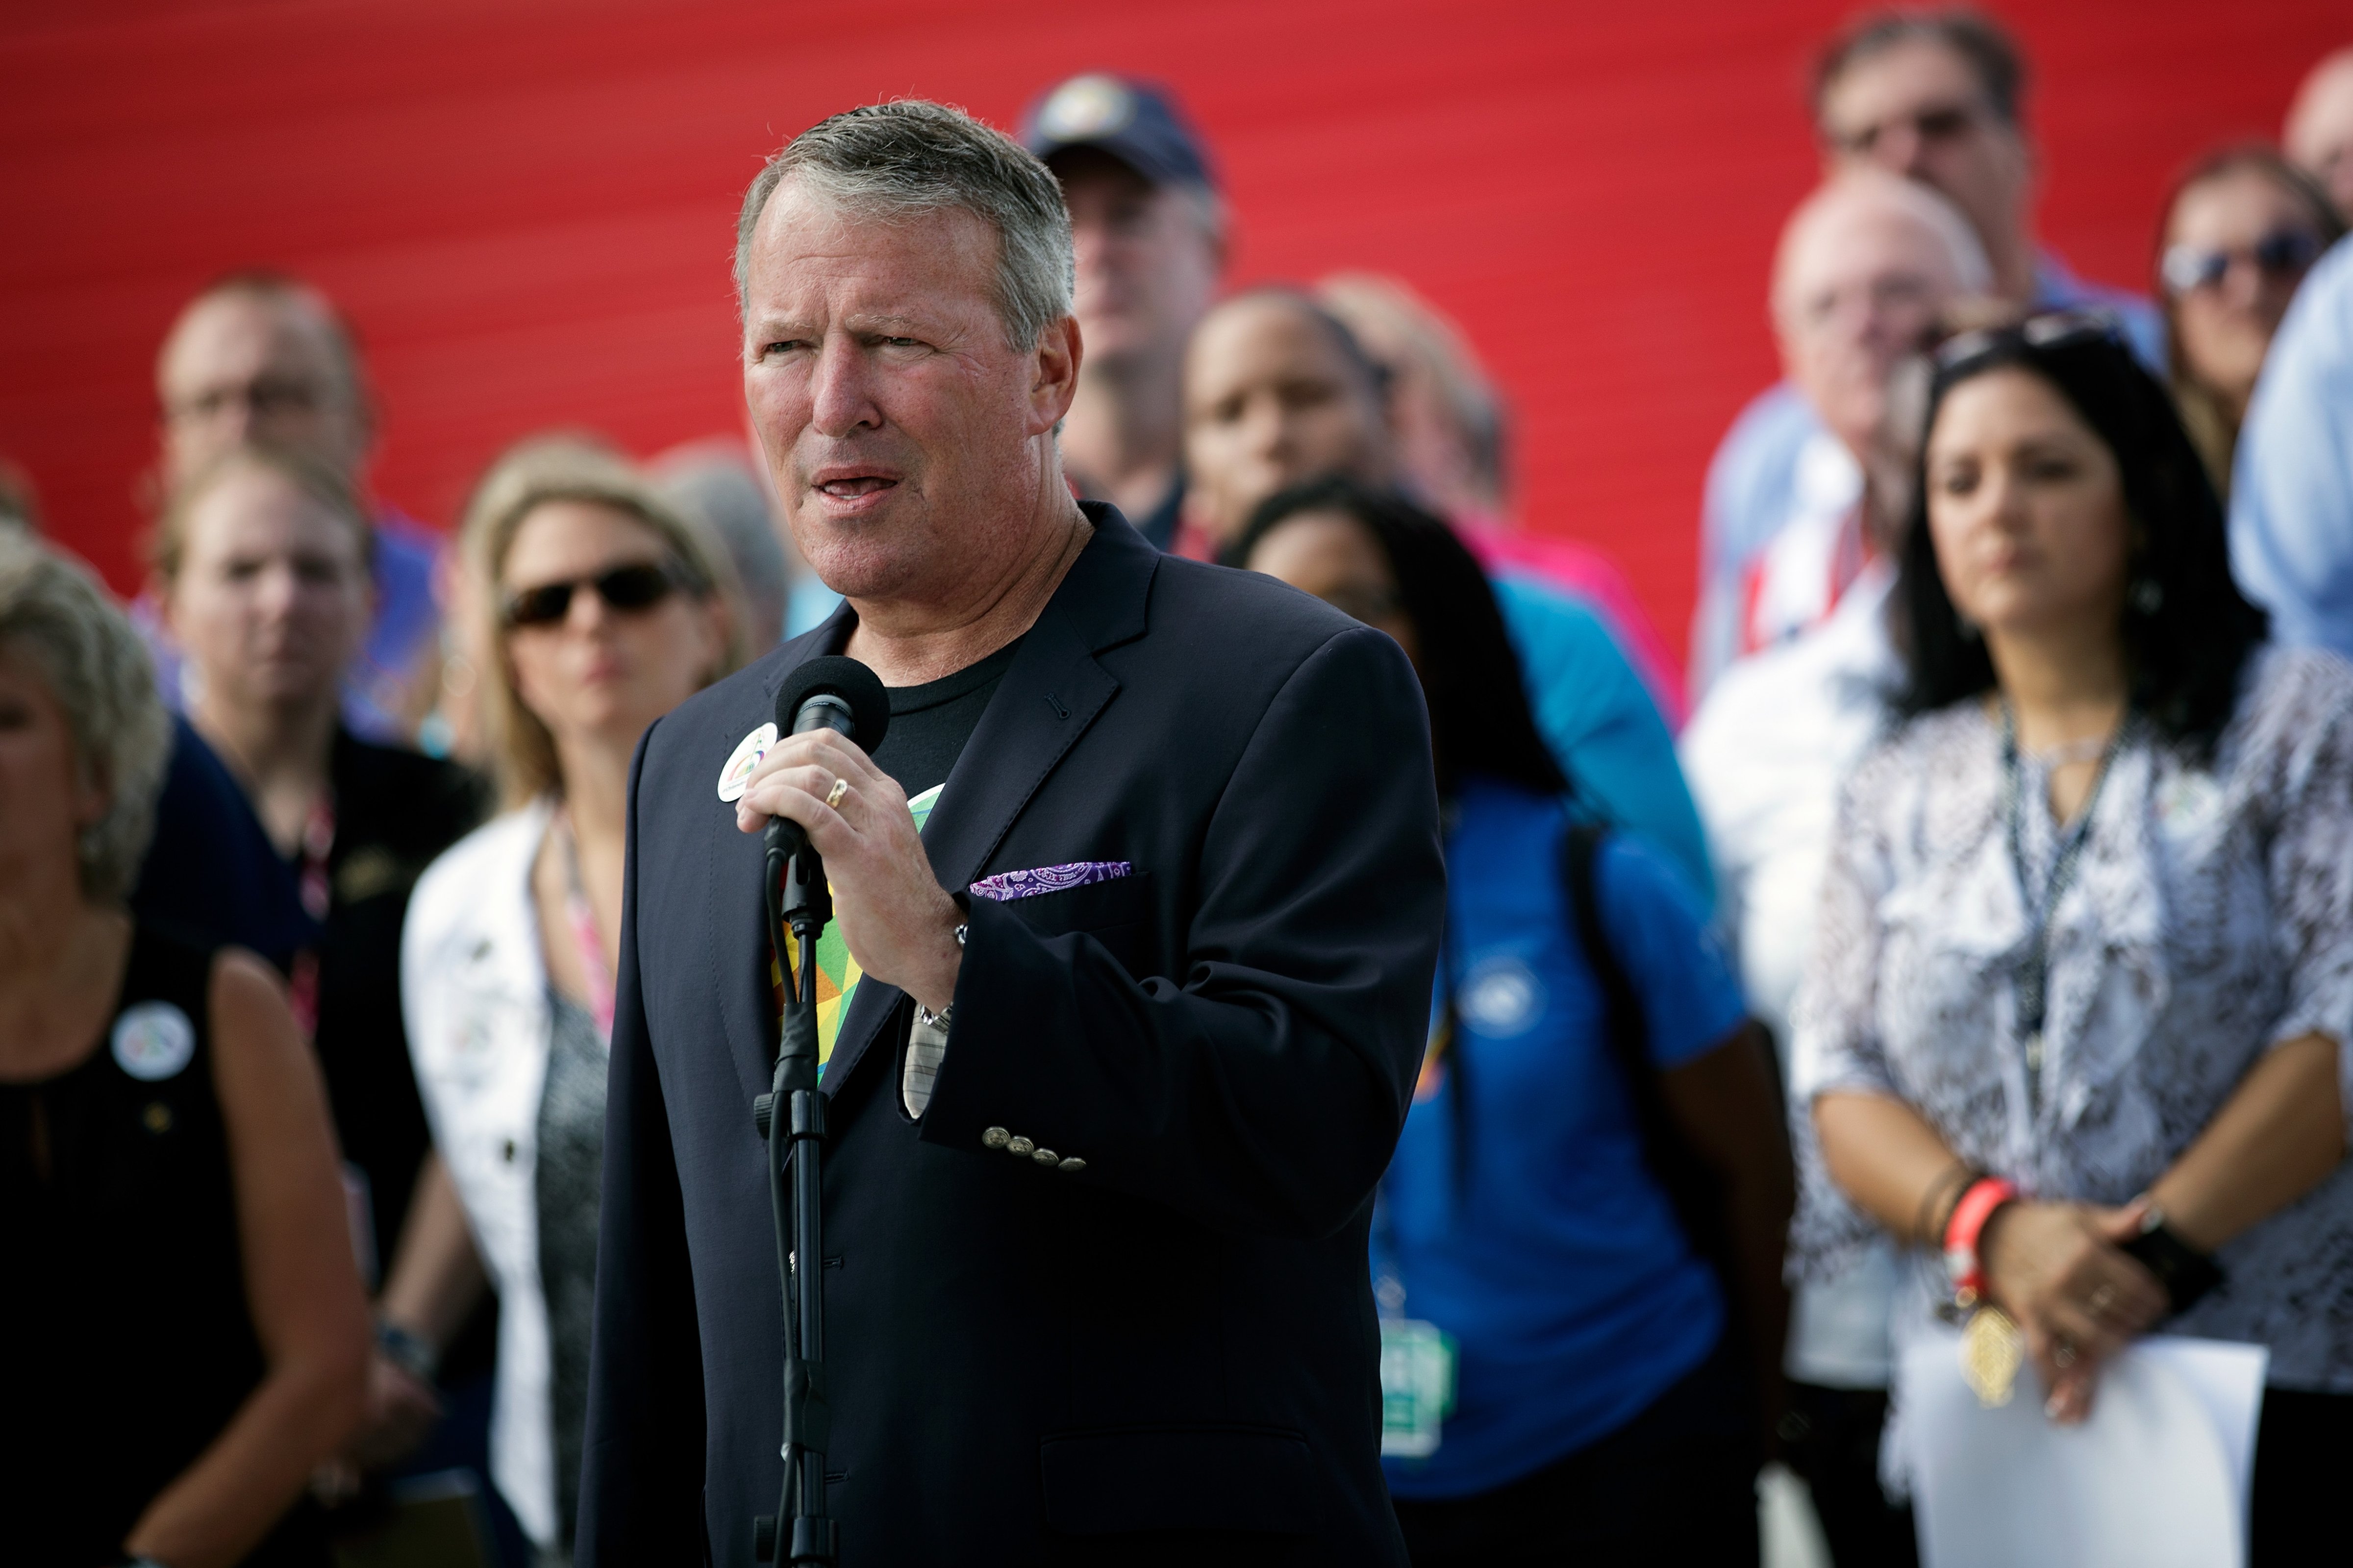 Surrounded by members of federal, state and local agencies, Orlando Mayor Buddy Dyer speaks at a press conference to provide an update on the assistance being provided to victims' families at the Orland Family Assistance Center, at Camping World Stadium, June 17, 2016 in Orlando, Florida. (Drew Angerer—Getty Images)